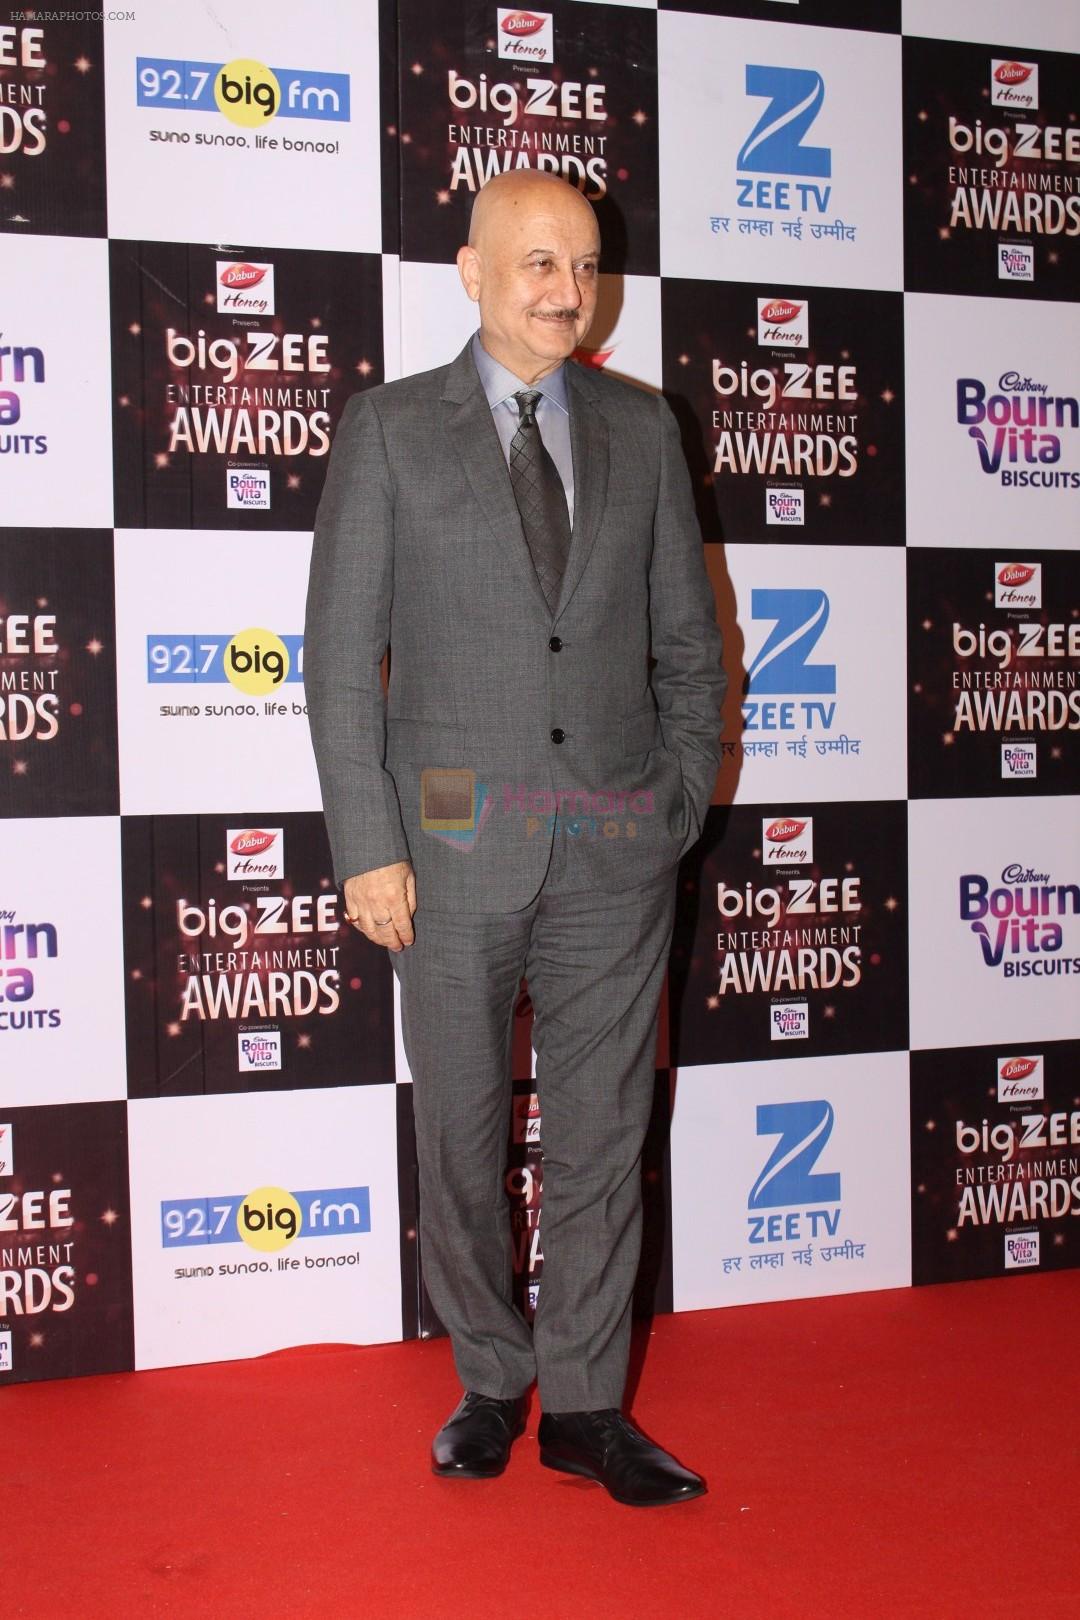 Anupam Kher At Red Carpet Of Big Zee Entertainment Awards 2017 on 29th July 2017